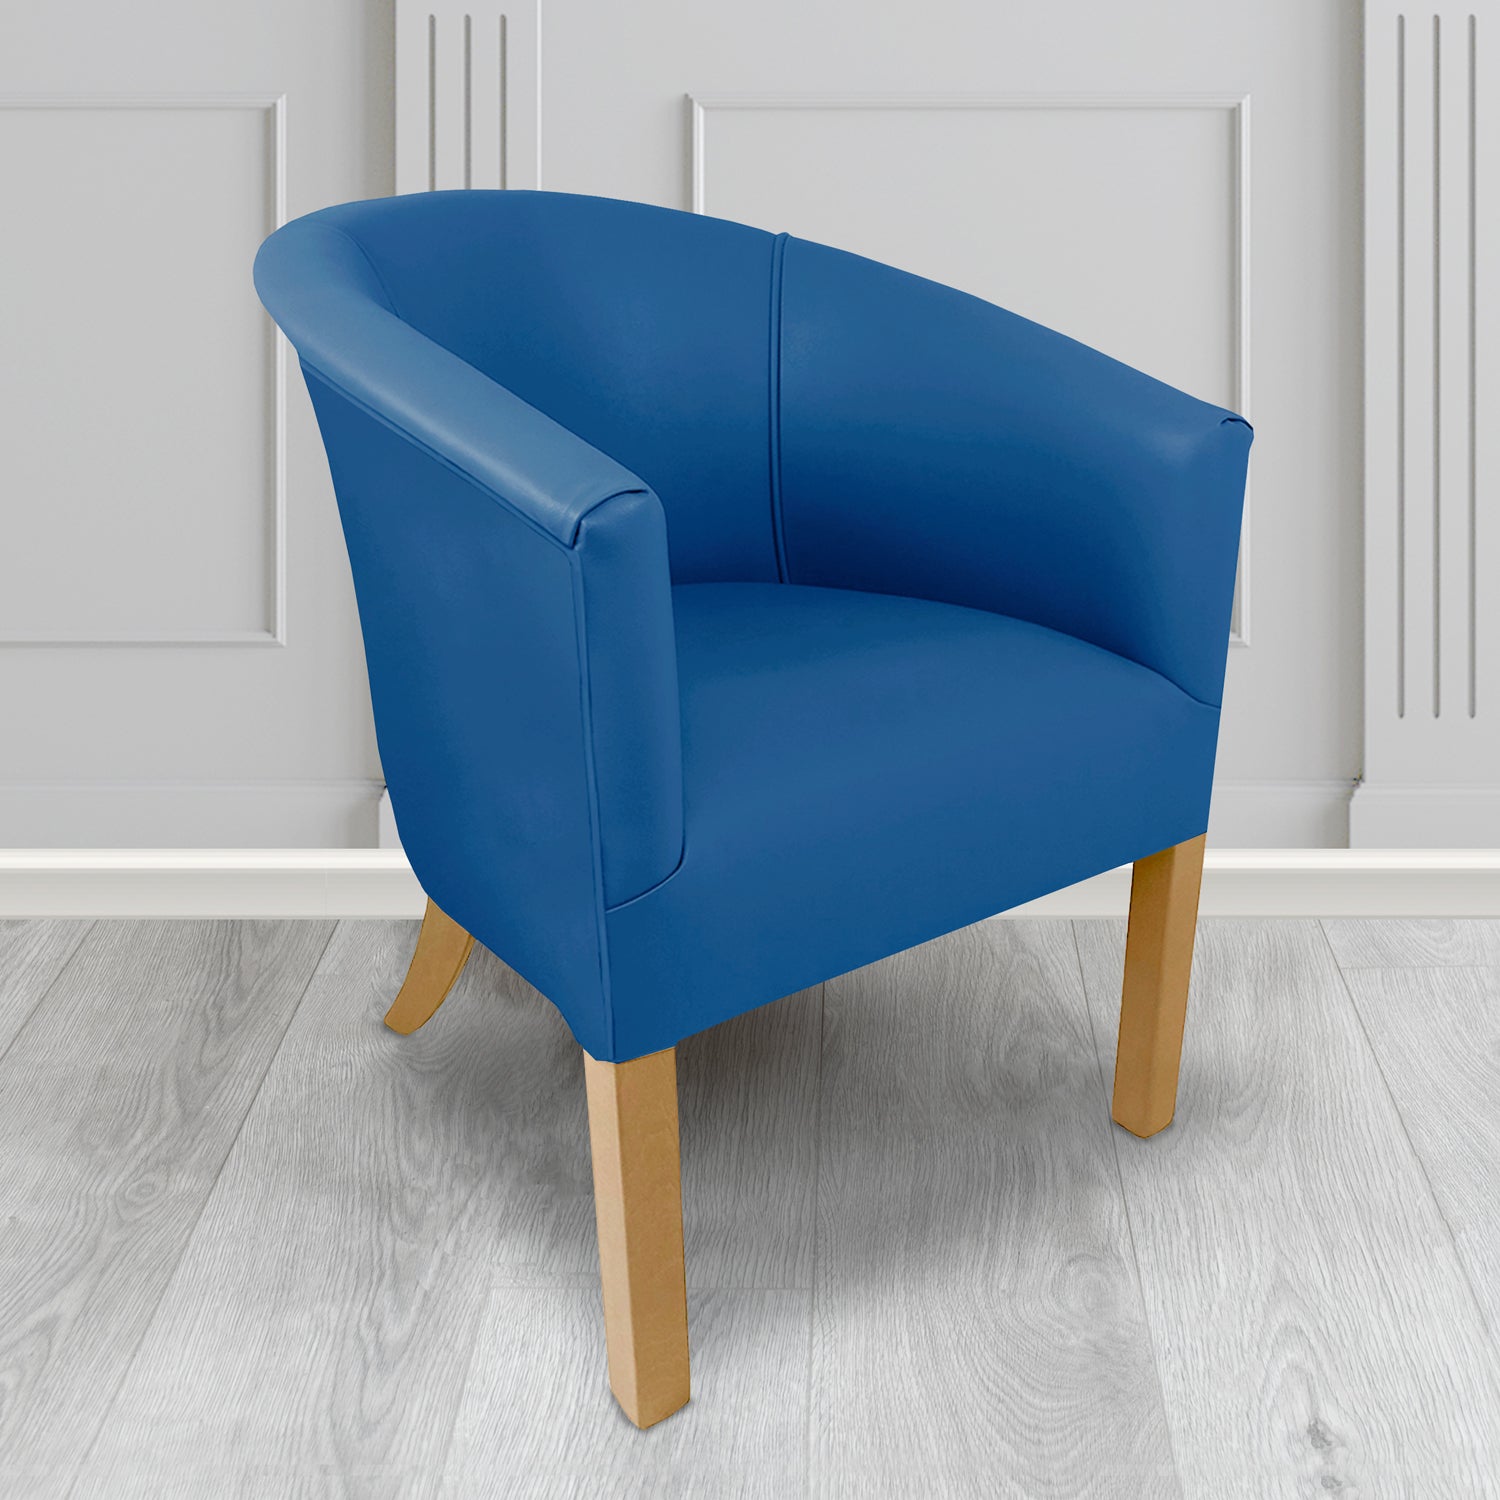 Lewisham Tub Chair in Agua Paint Pot Blue Crib 5 Faux Leather - Antimicrobial, Stain Resistant & Waterproof - The Tub Chair Shop